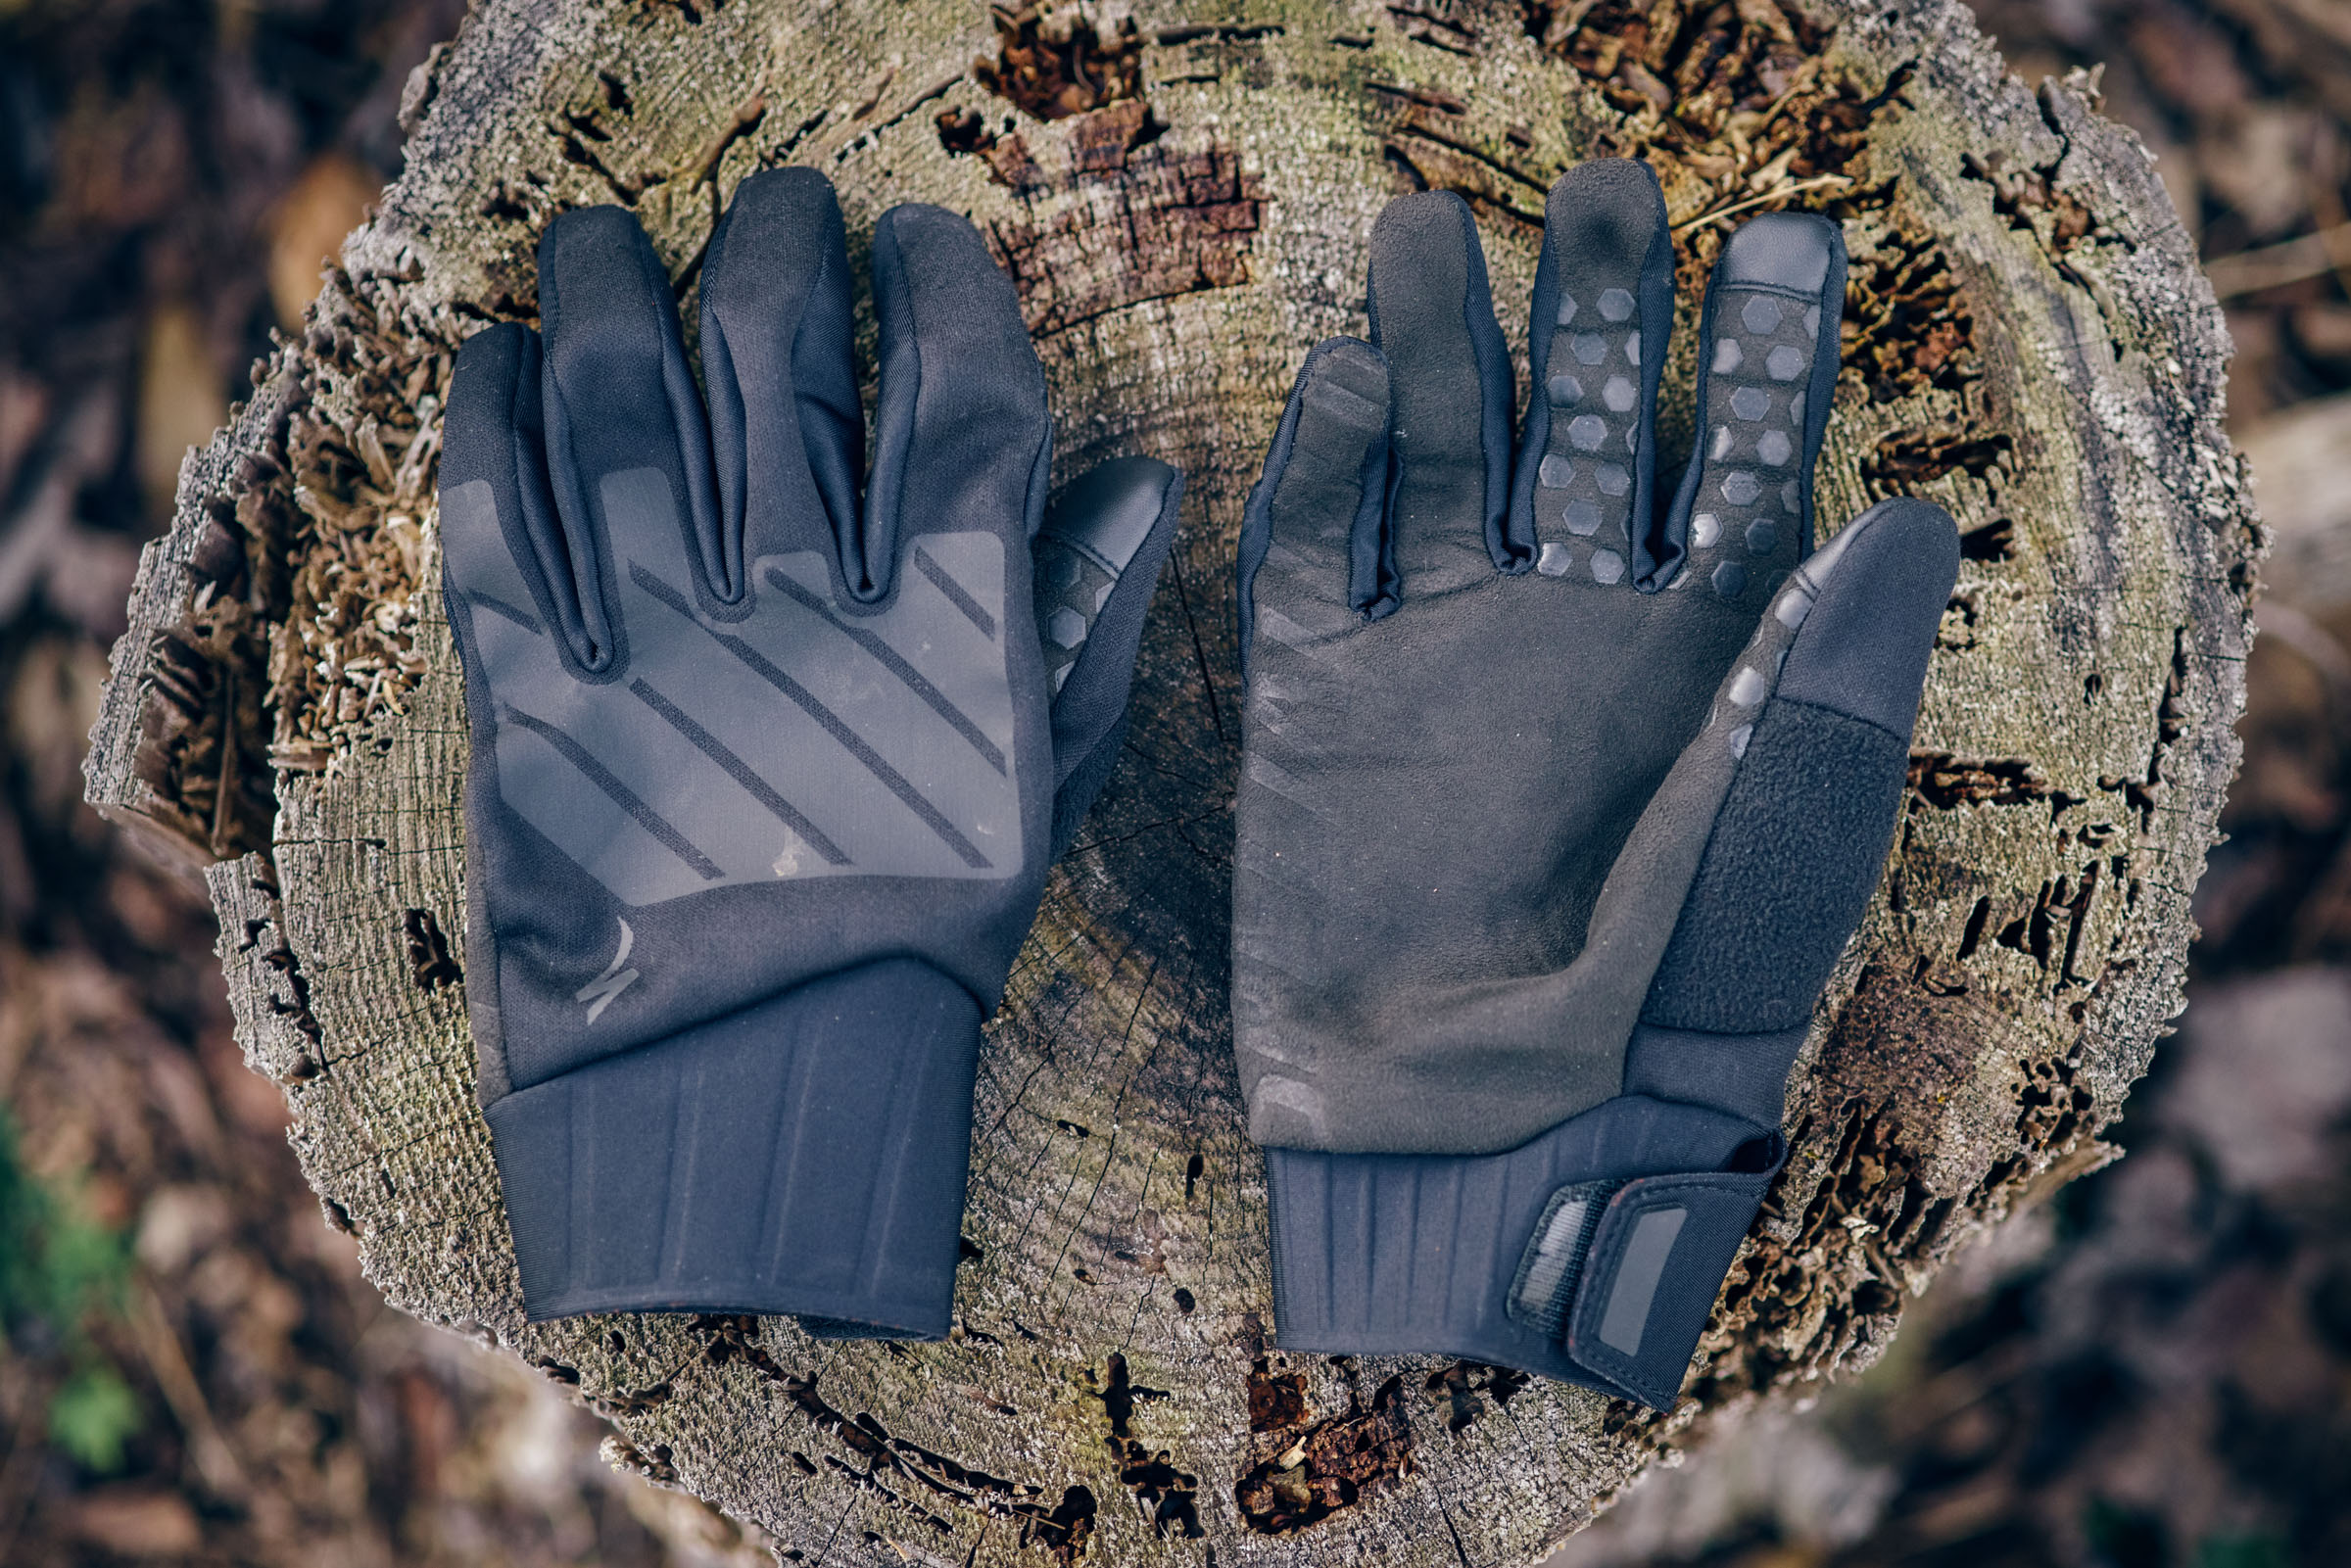 The Best Cycling Gloves - List for All Conditions 